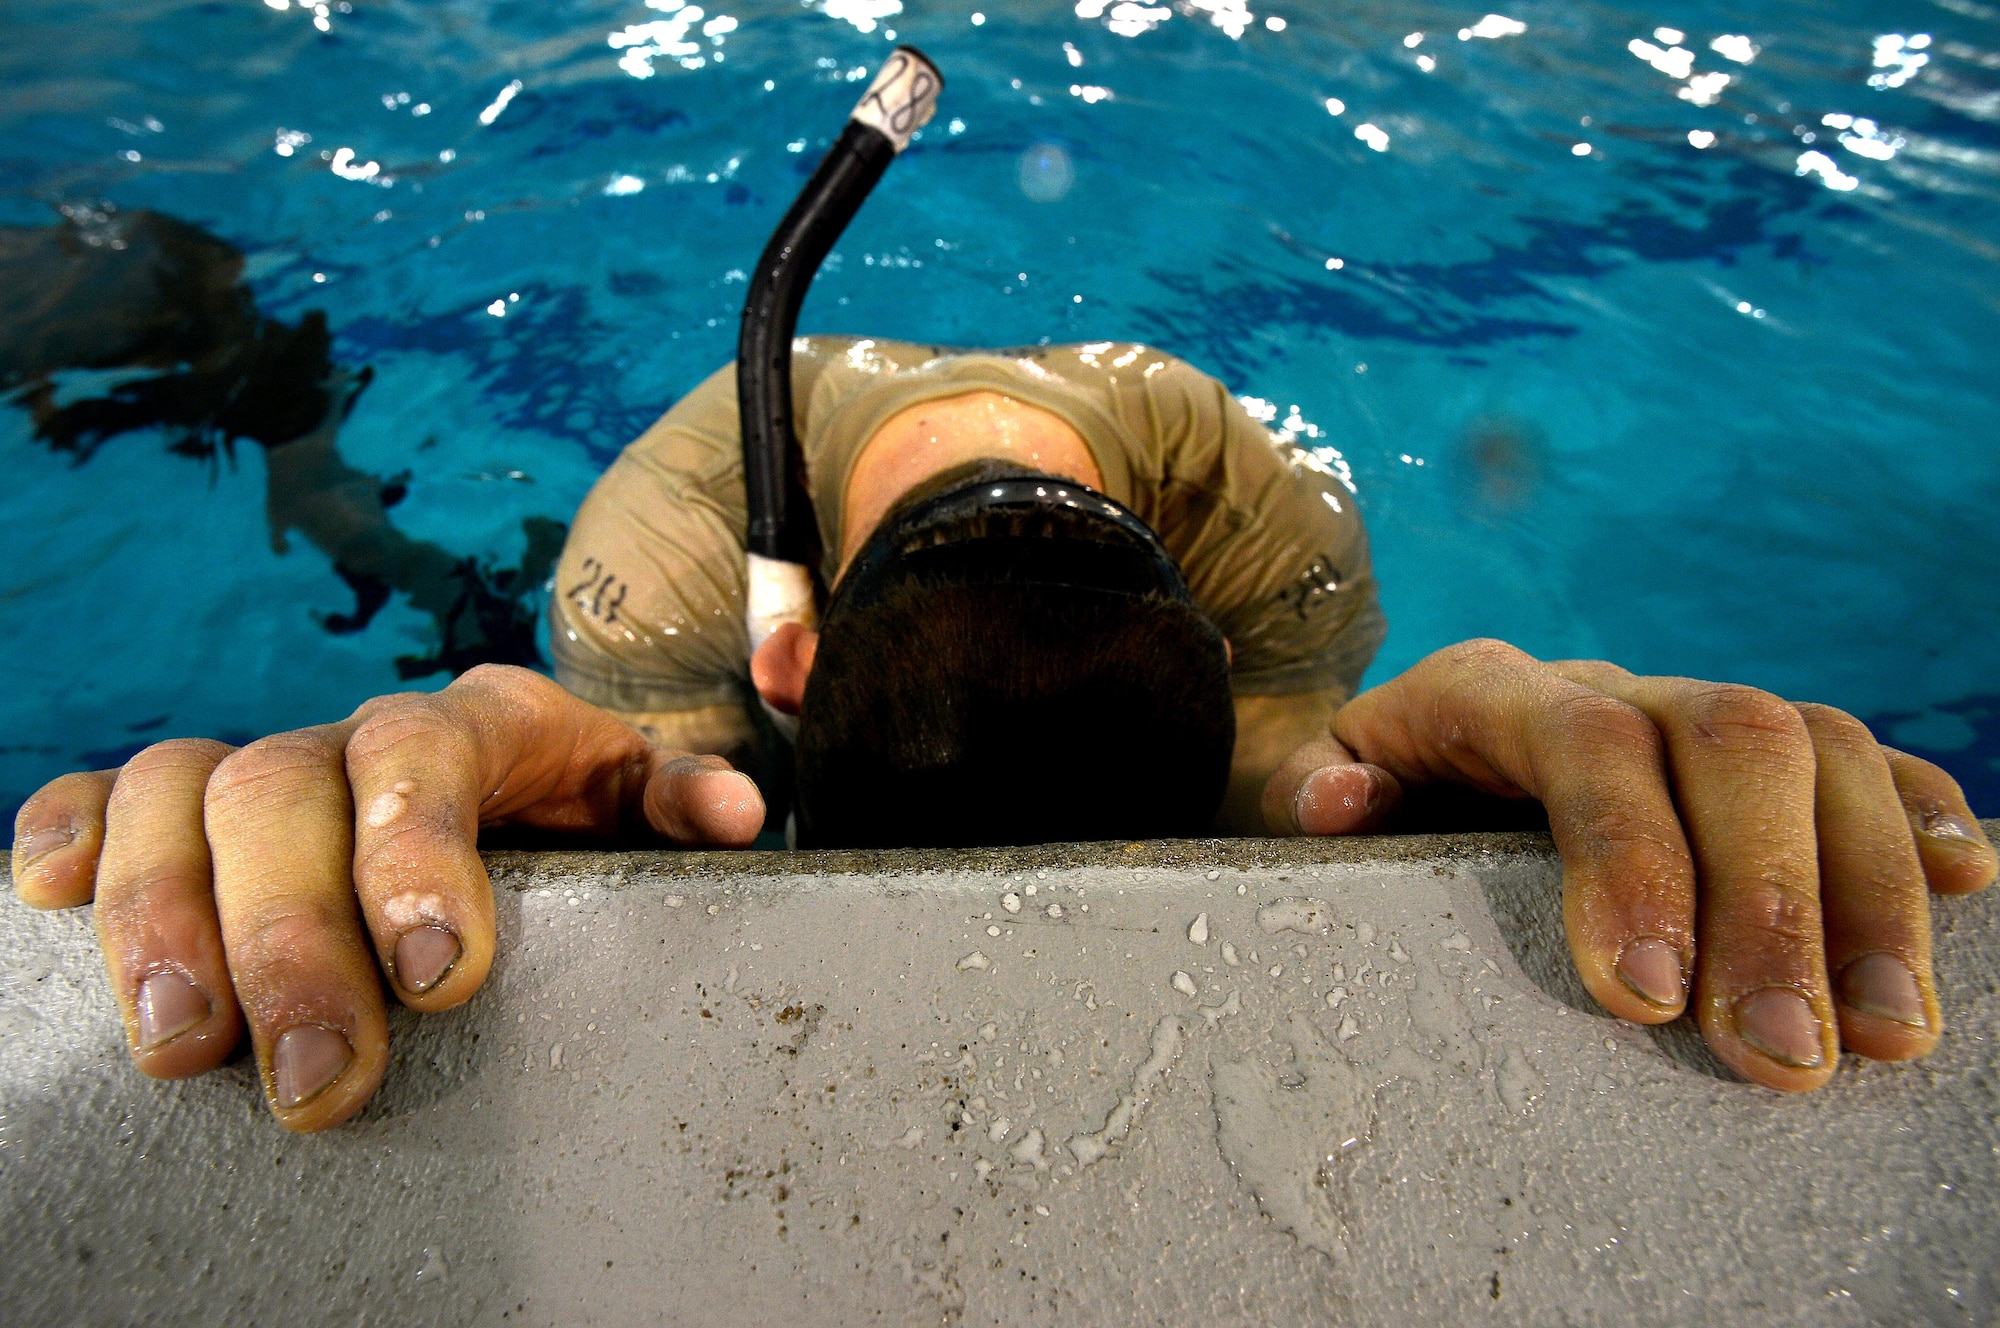 A U.S. Air Force Combat Control trainee assigned to Operating Location C, 342nd Training Squadron, hangs on to the side of the pool as he catches his breath and readies himself to swim more laps under water during an early morning water circuit training session at Pope Army Airfield, North Carolina, Feb 12, 2015. After the water circuits,  students were made to quickly get out of the pool and hustle to the gym for their next training session. (U.S. Air Force photo by Staff Sgt. Kenny Holston)